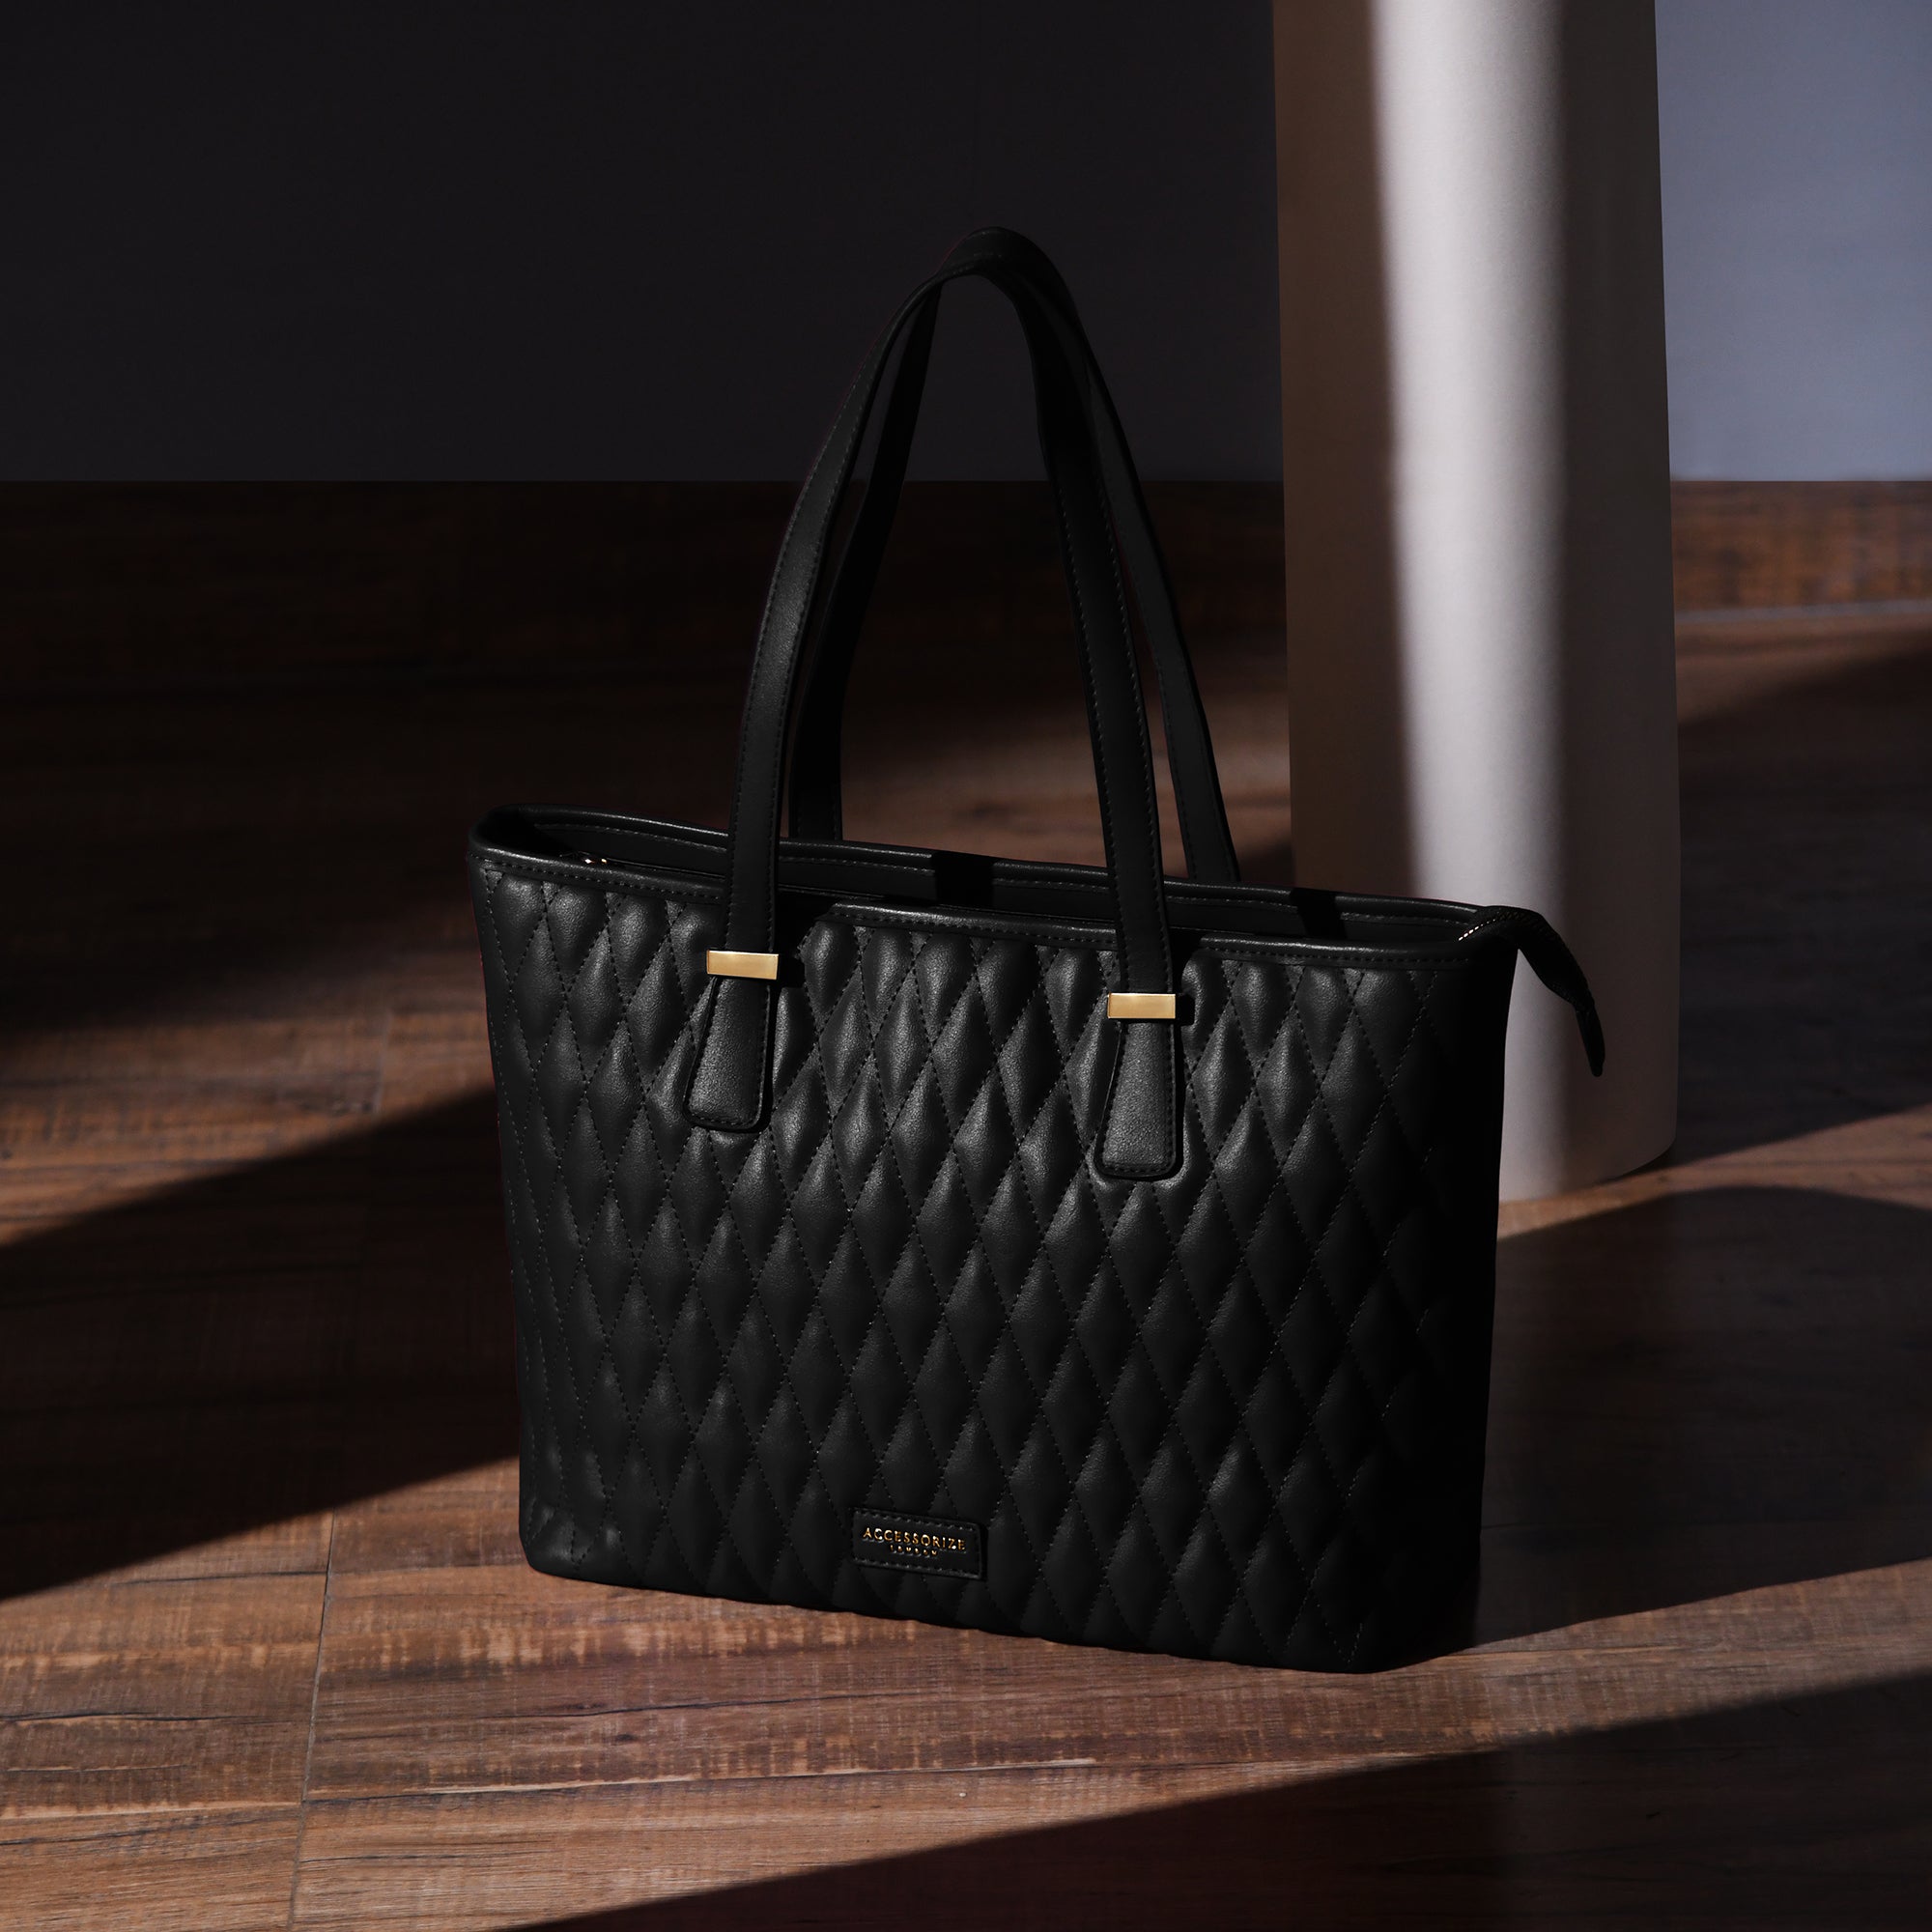 Buy Black Lannister quilted tote Bag Online - Accessorize India